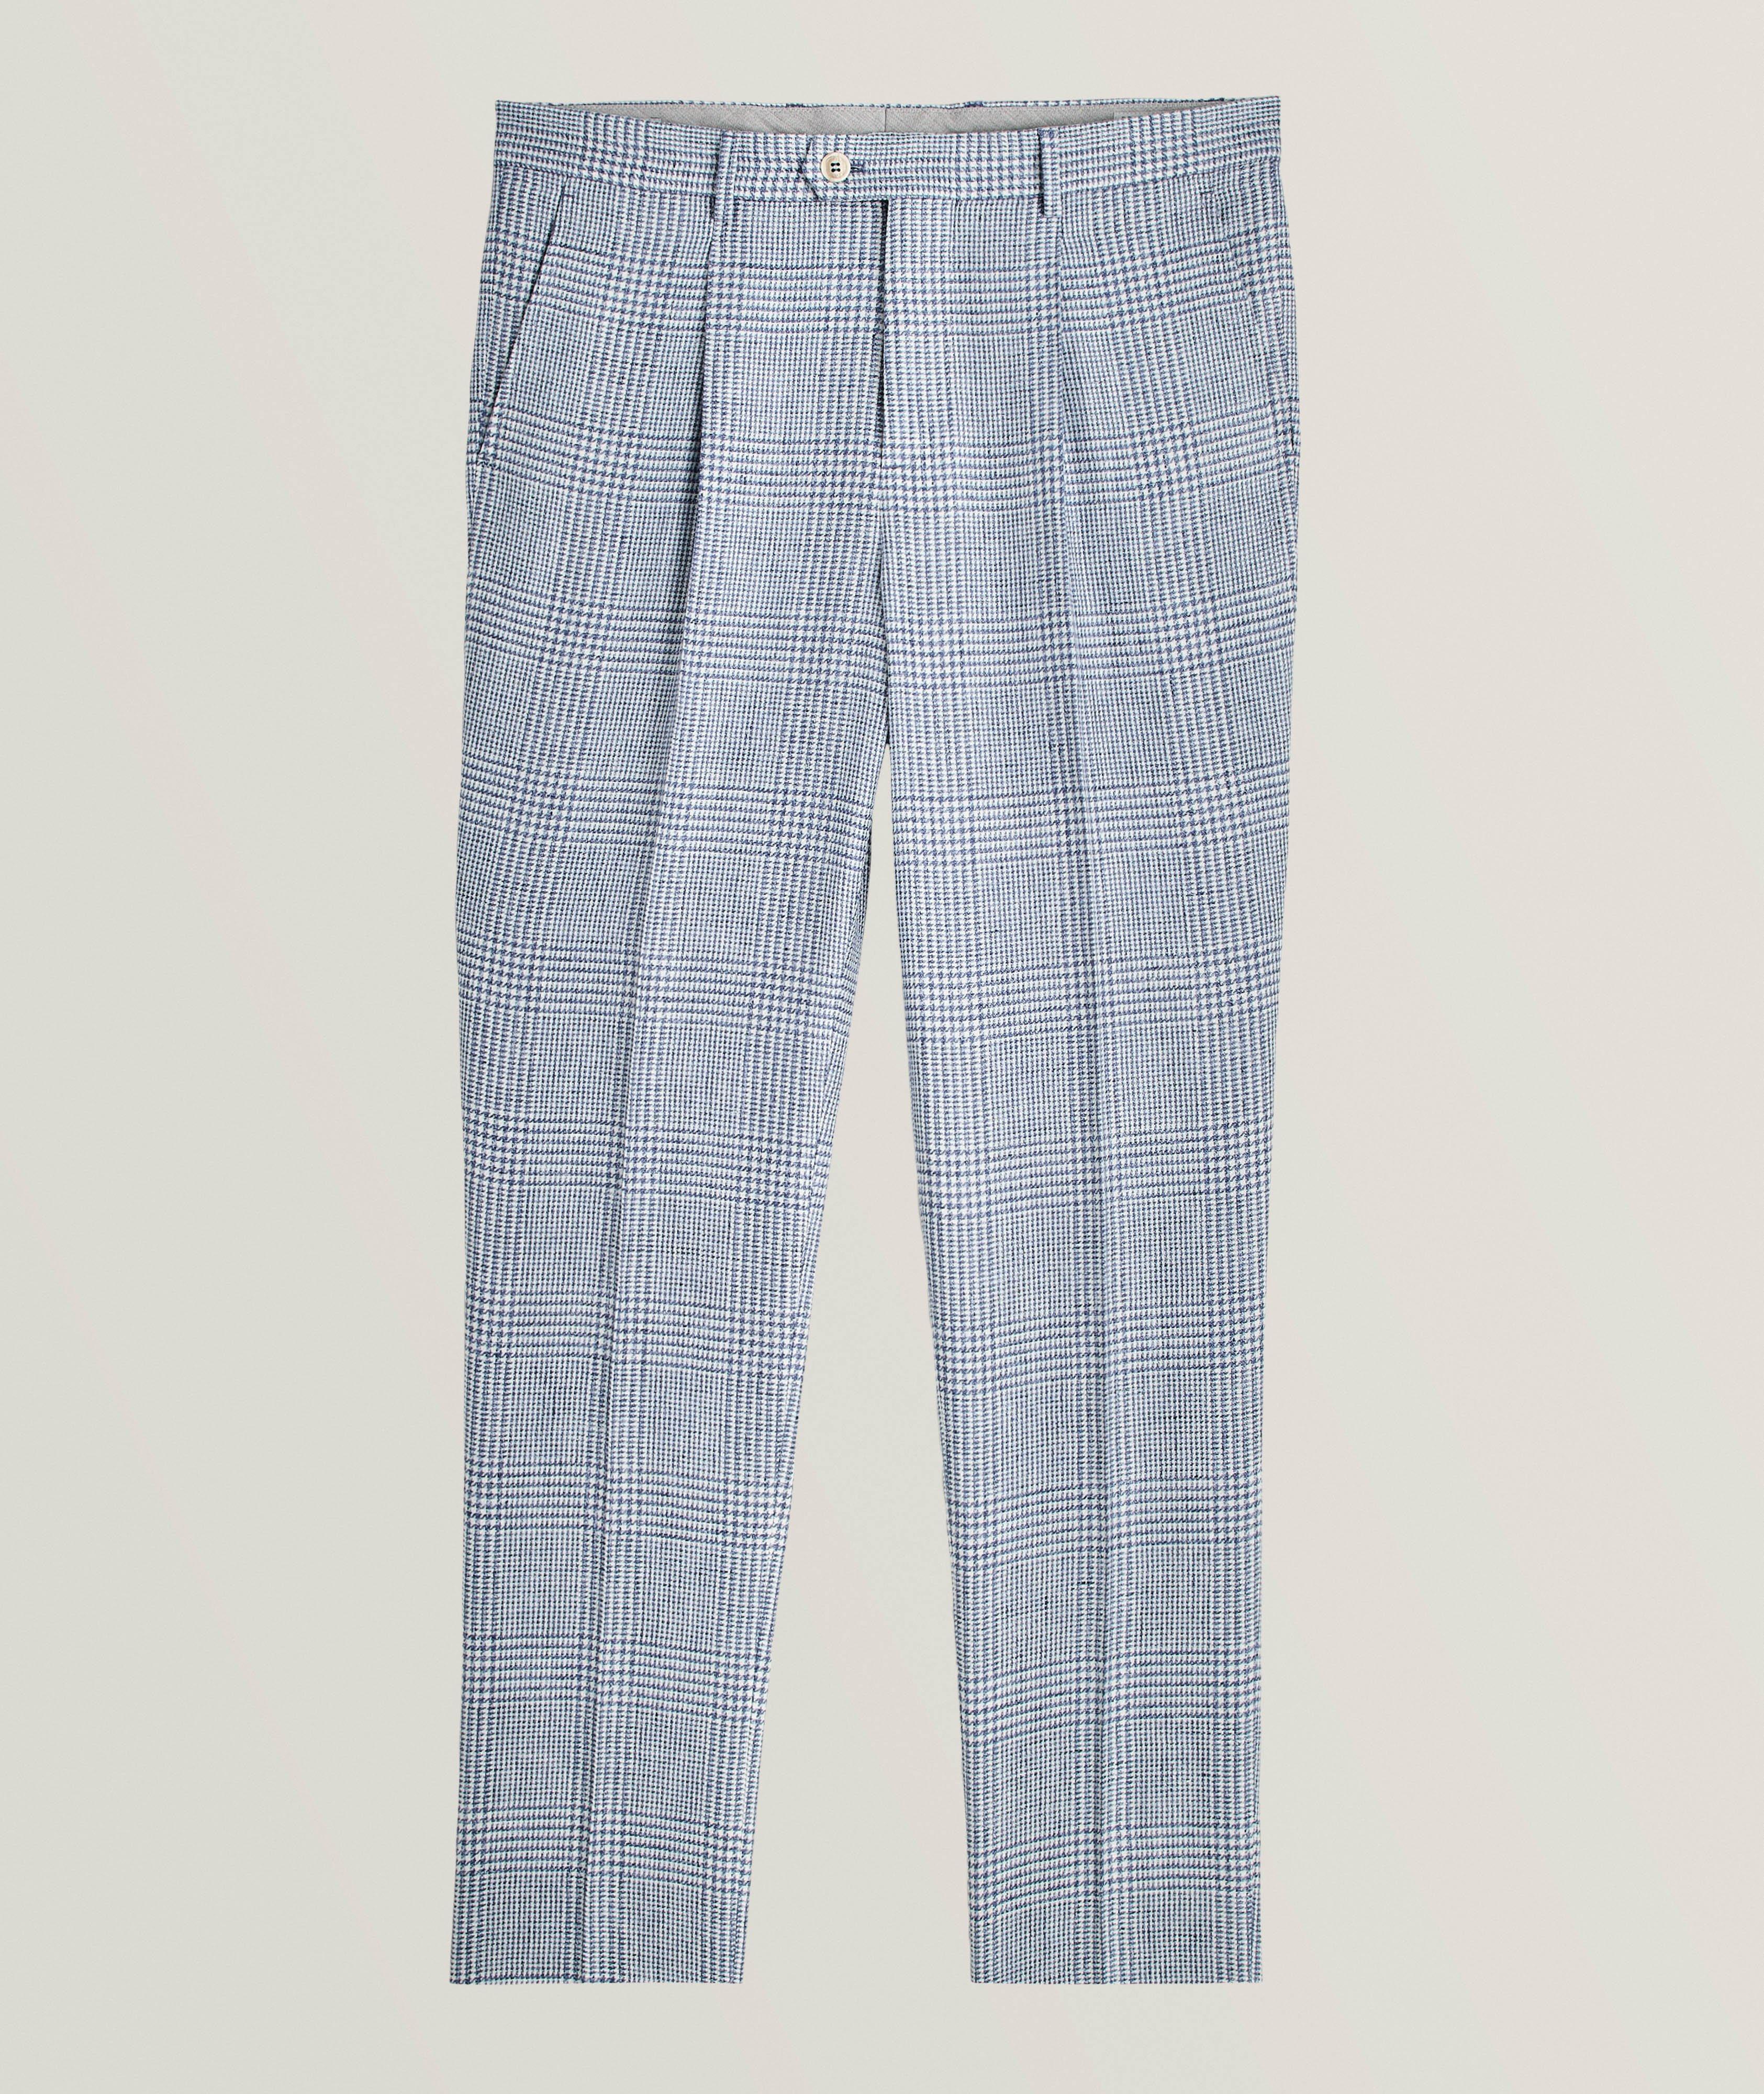 Houndstooth Single-Pleat Wool-Blend Trousers image 0